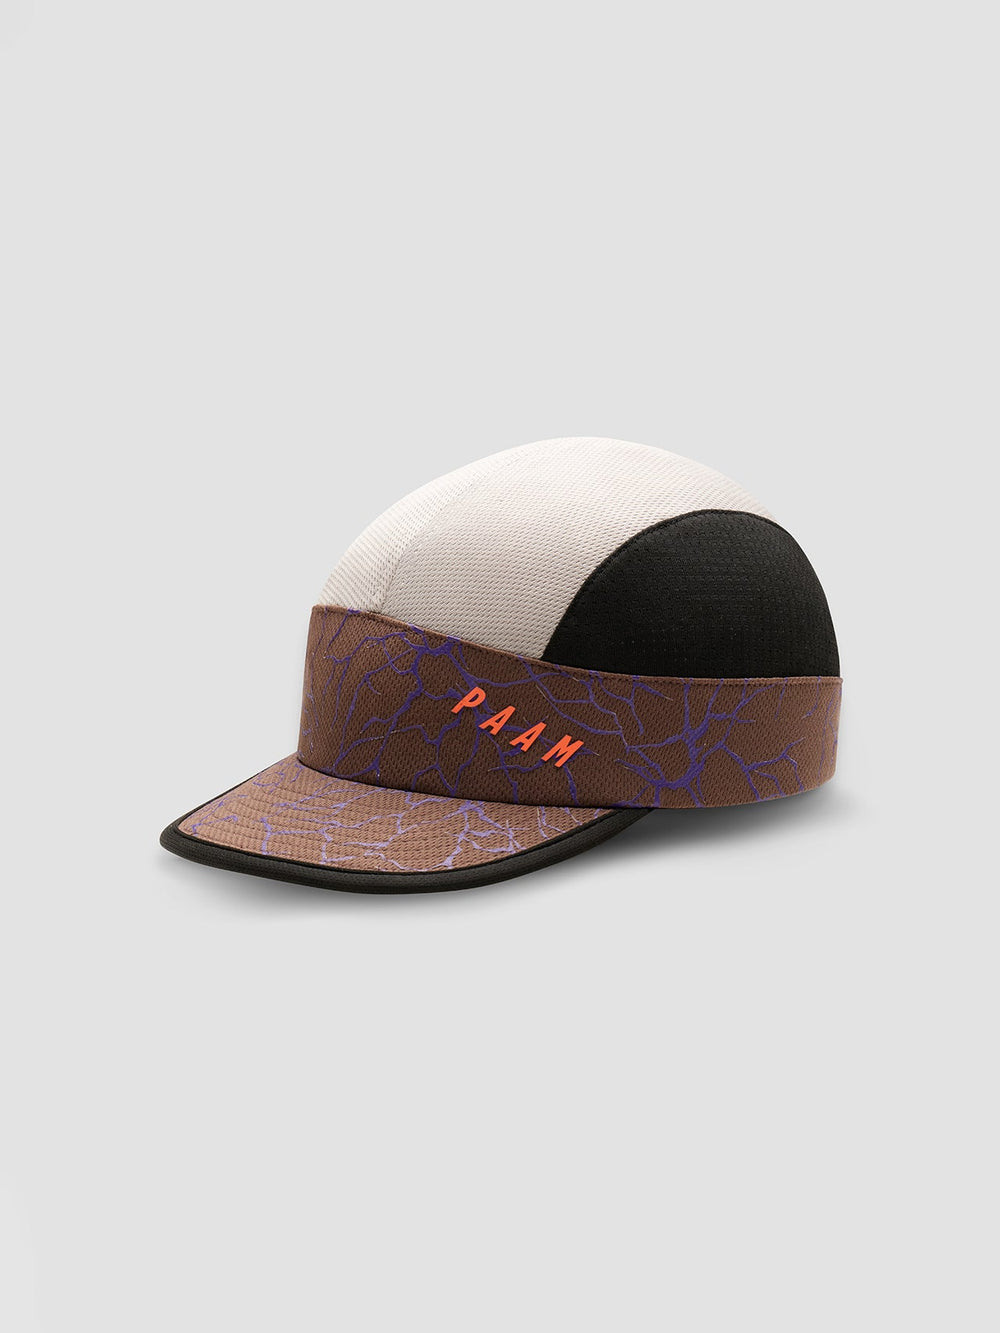 Product Image for MAAP X PAM Mesh Cap